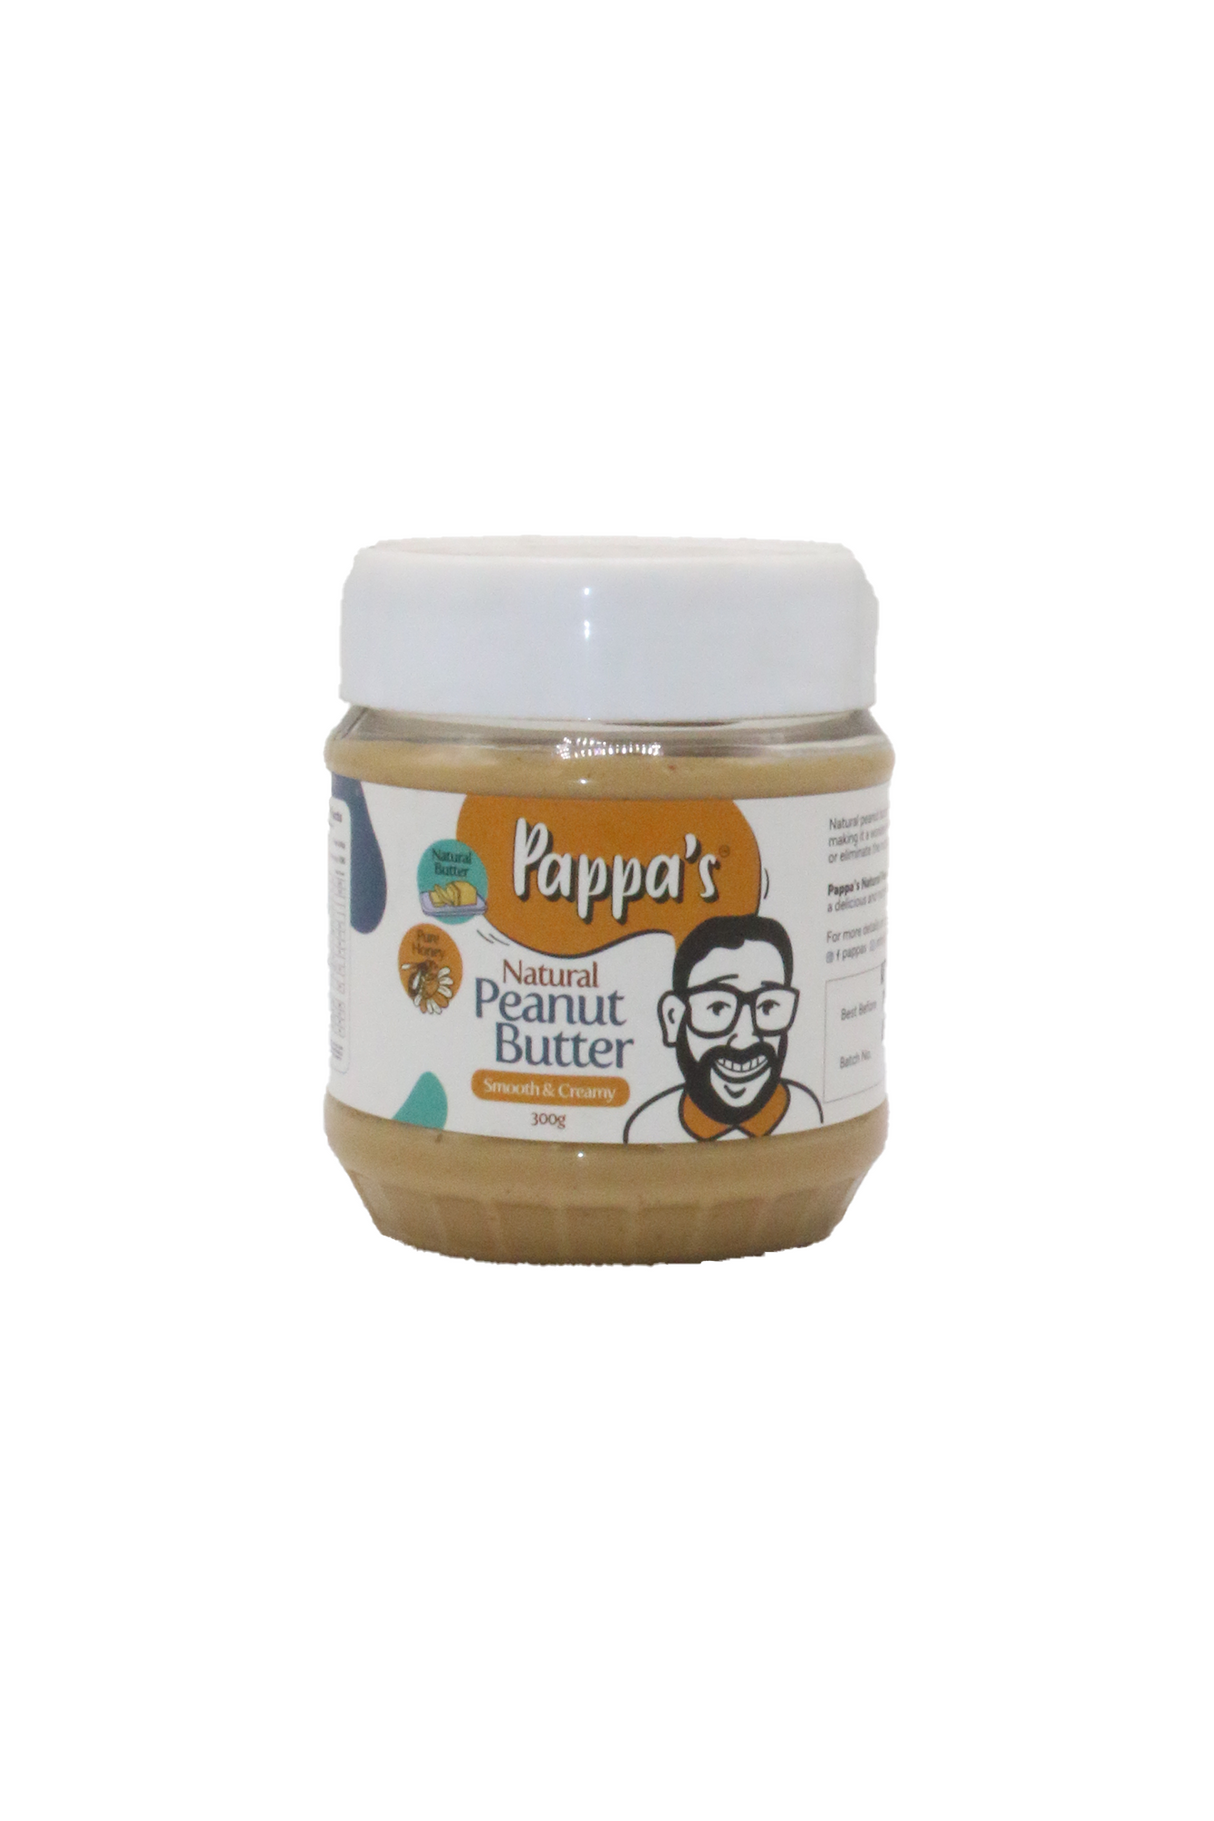 pappas natural peanut butter smooth&creamy 300g